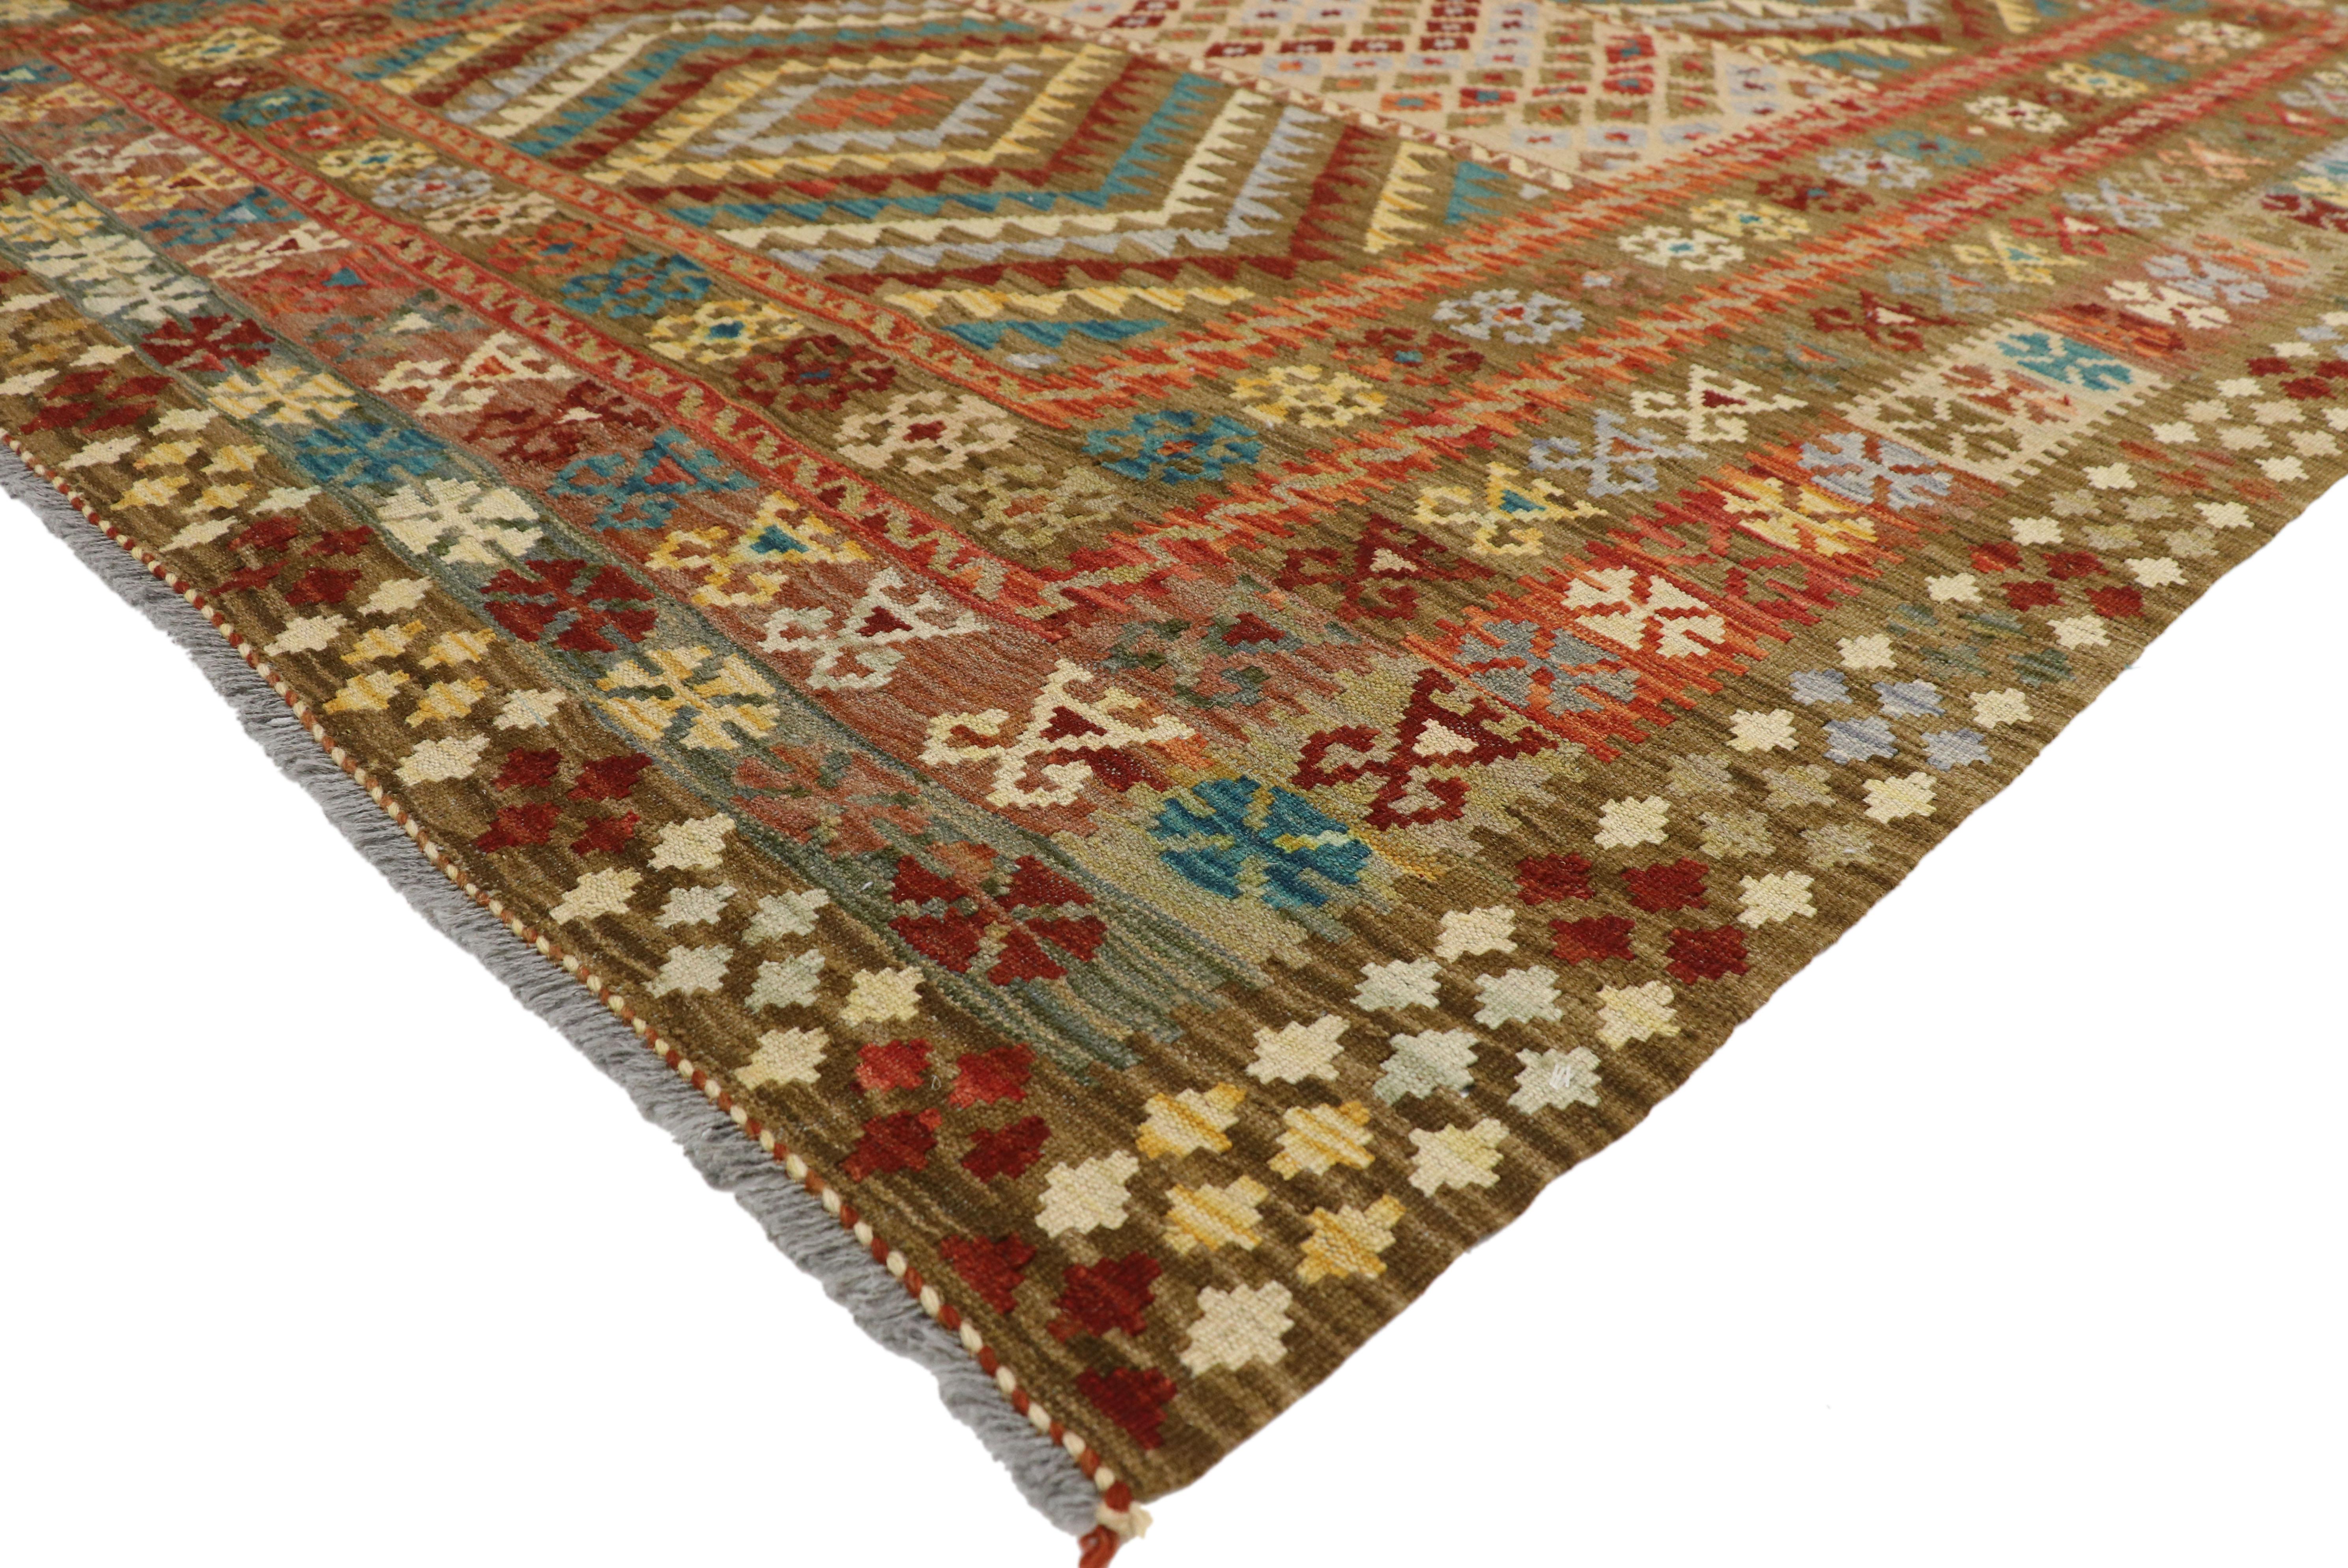 80151 Vintage Afghan Kilim Rug, 06'03 X 07'06. Afghan kilim rugs, also known as Afghan flatweave rugs, are traditional handwoven textiles originating from Afghanistan. Renowned for their vibrant colors, intricate patterns, and durable construction,